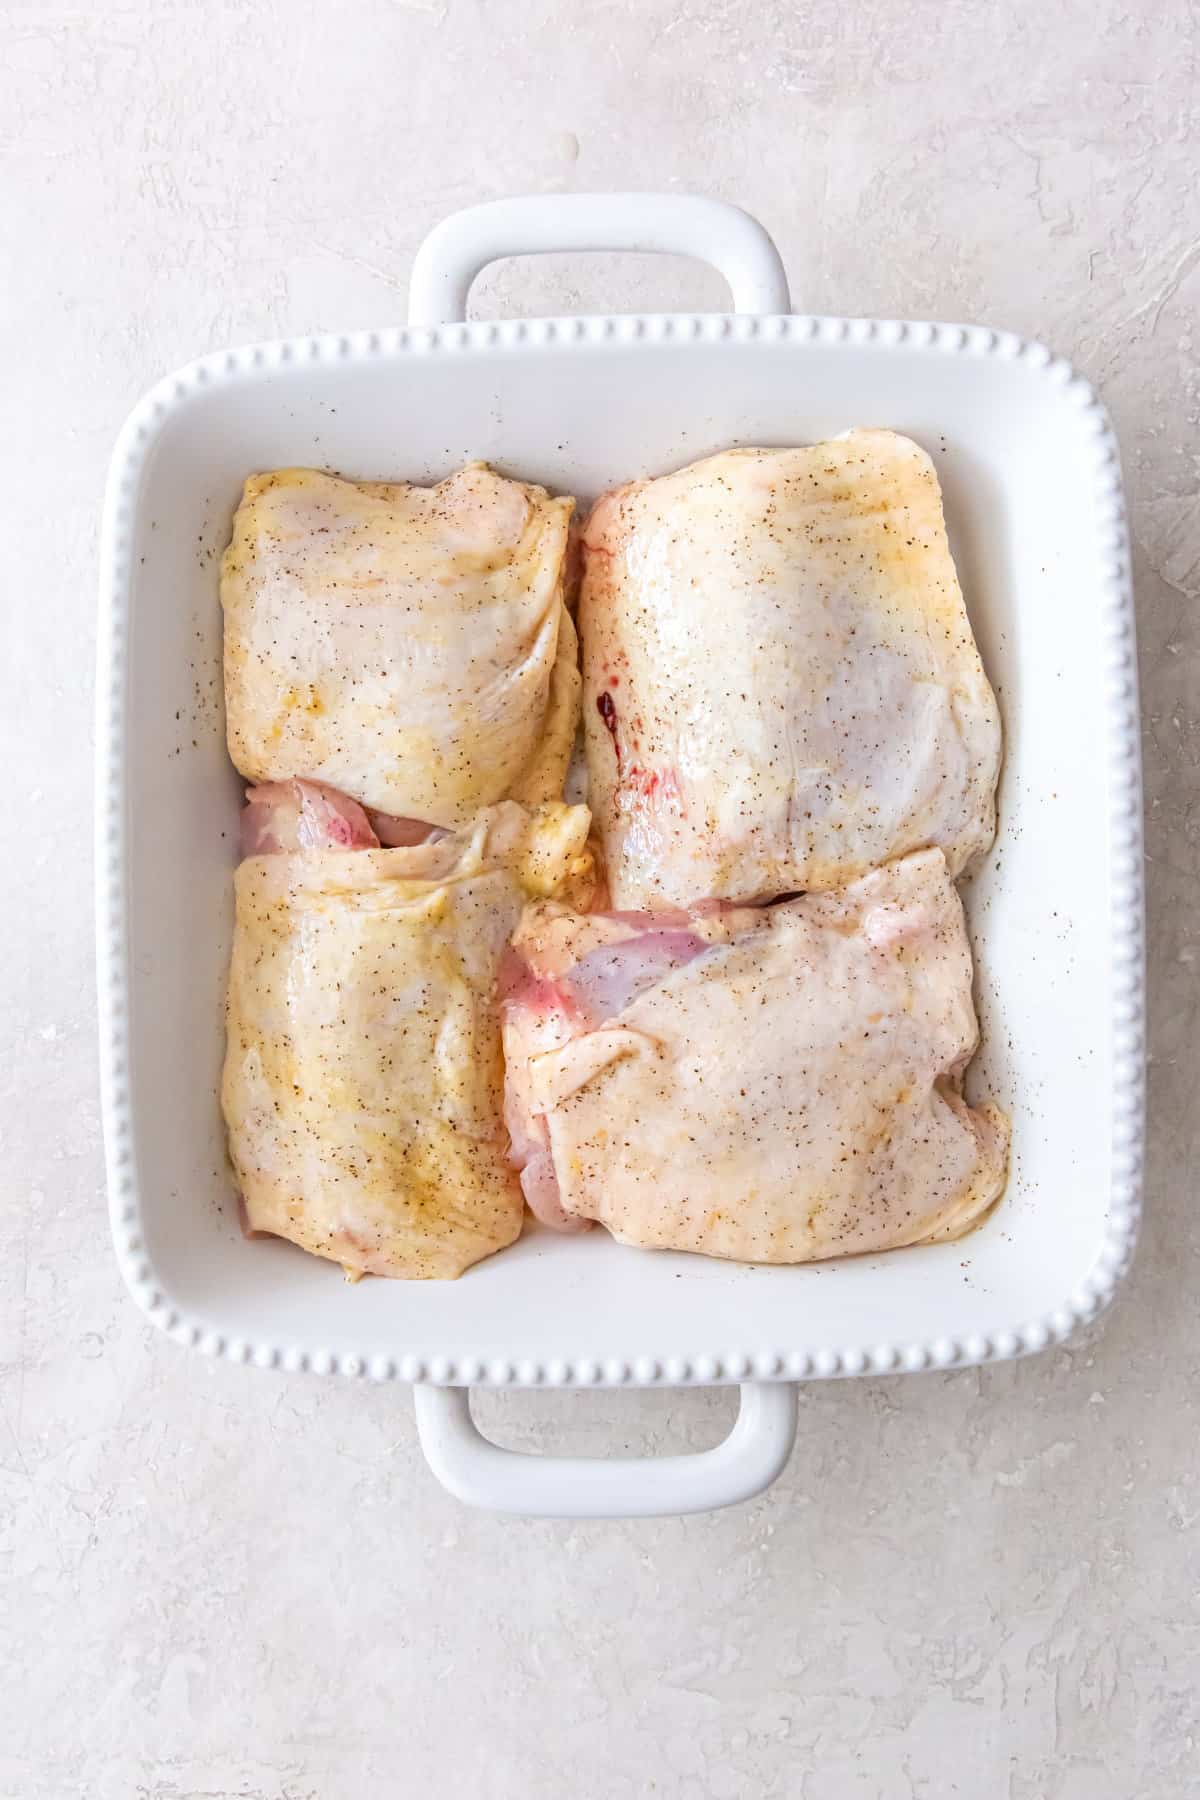 uncooked chicken thighs in a baking dish.